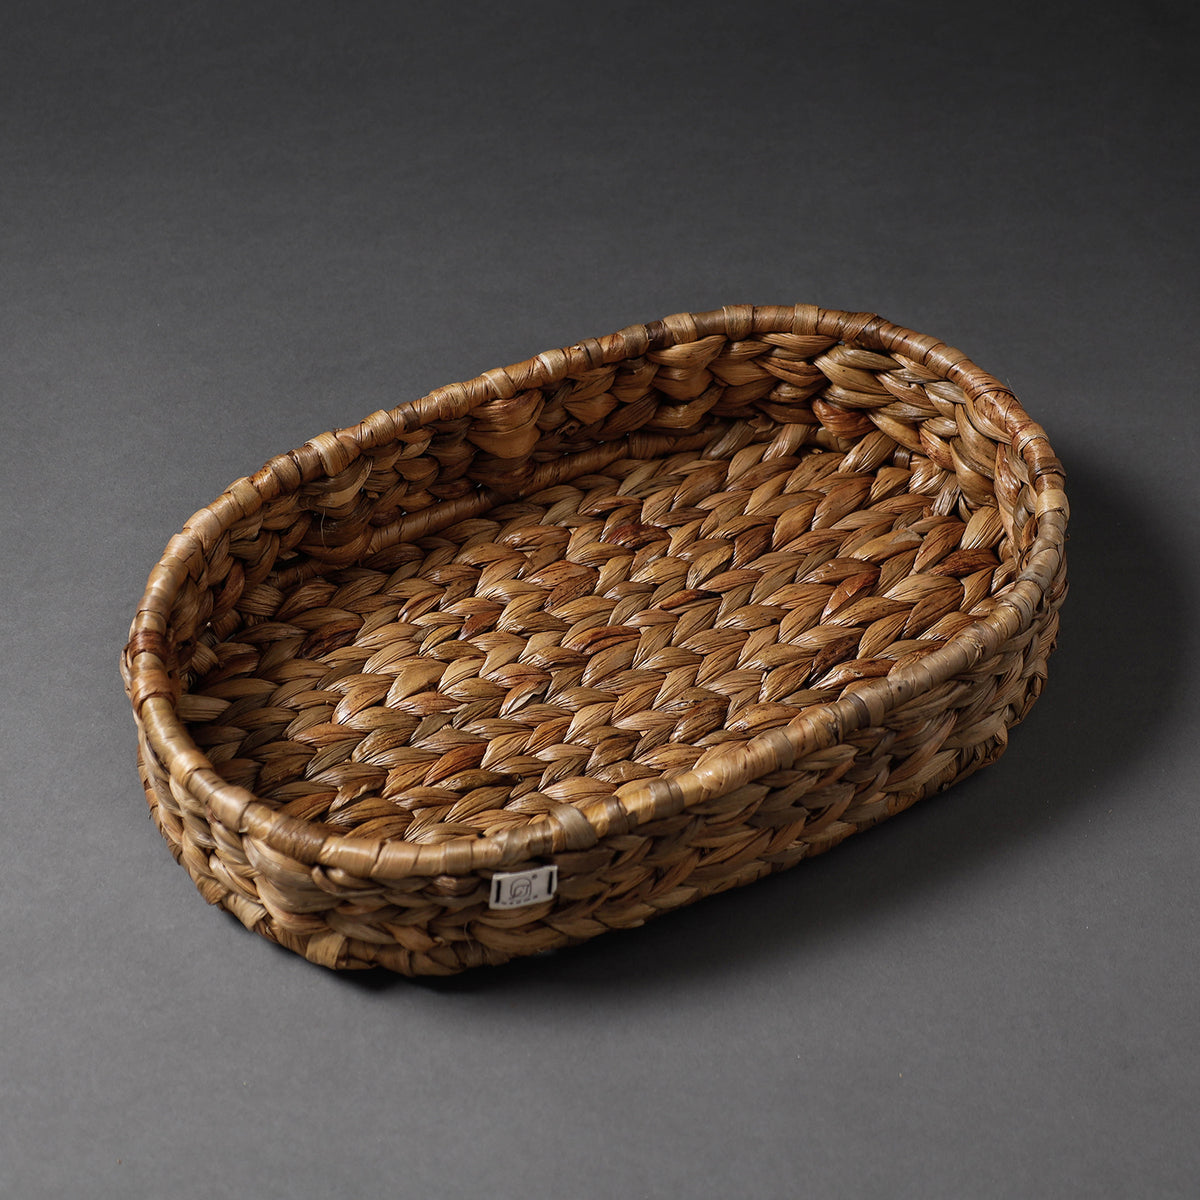 Handcrafted Organic Water Hyacinth Oval Tray (15 x 9 in)